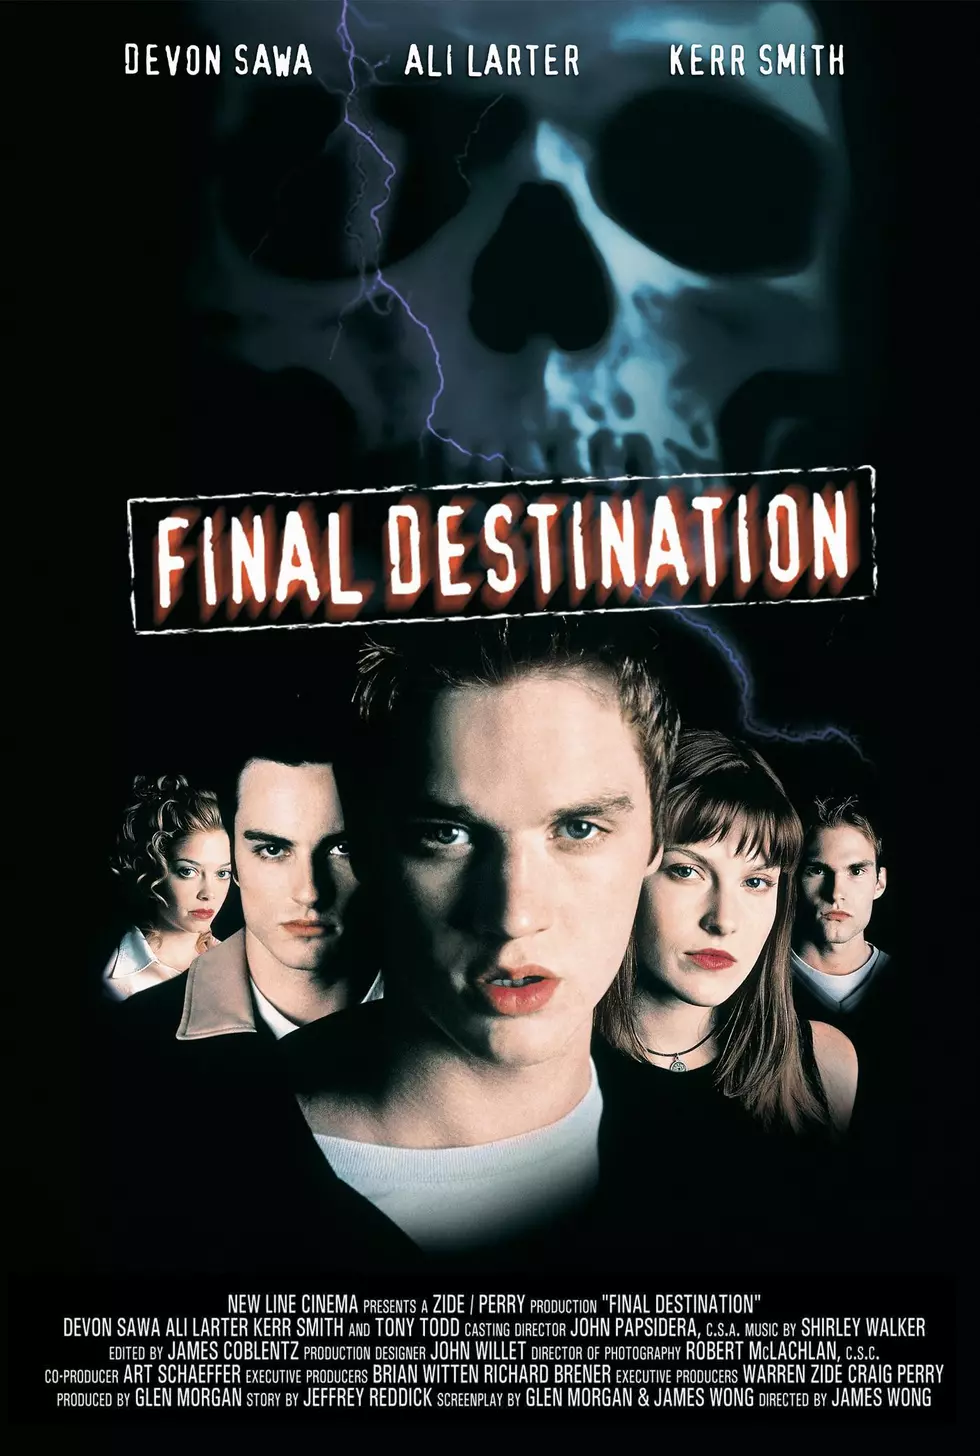 ‘Final Destination’ Franchise getting reinvented by ‘Saw’ writers